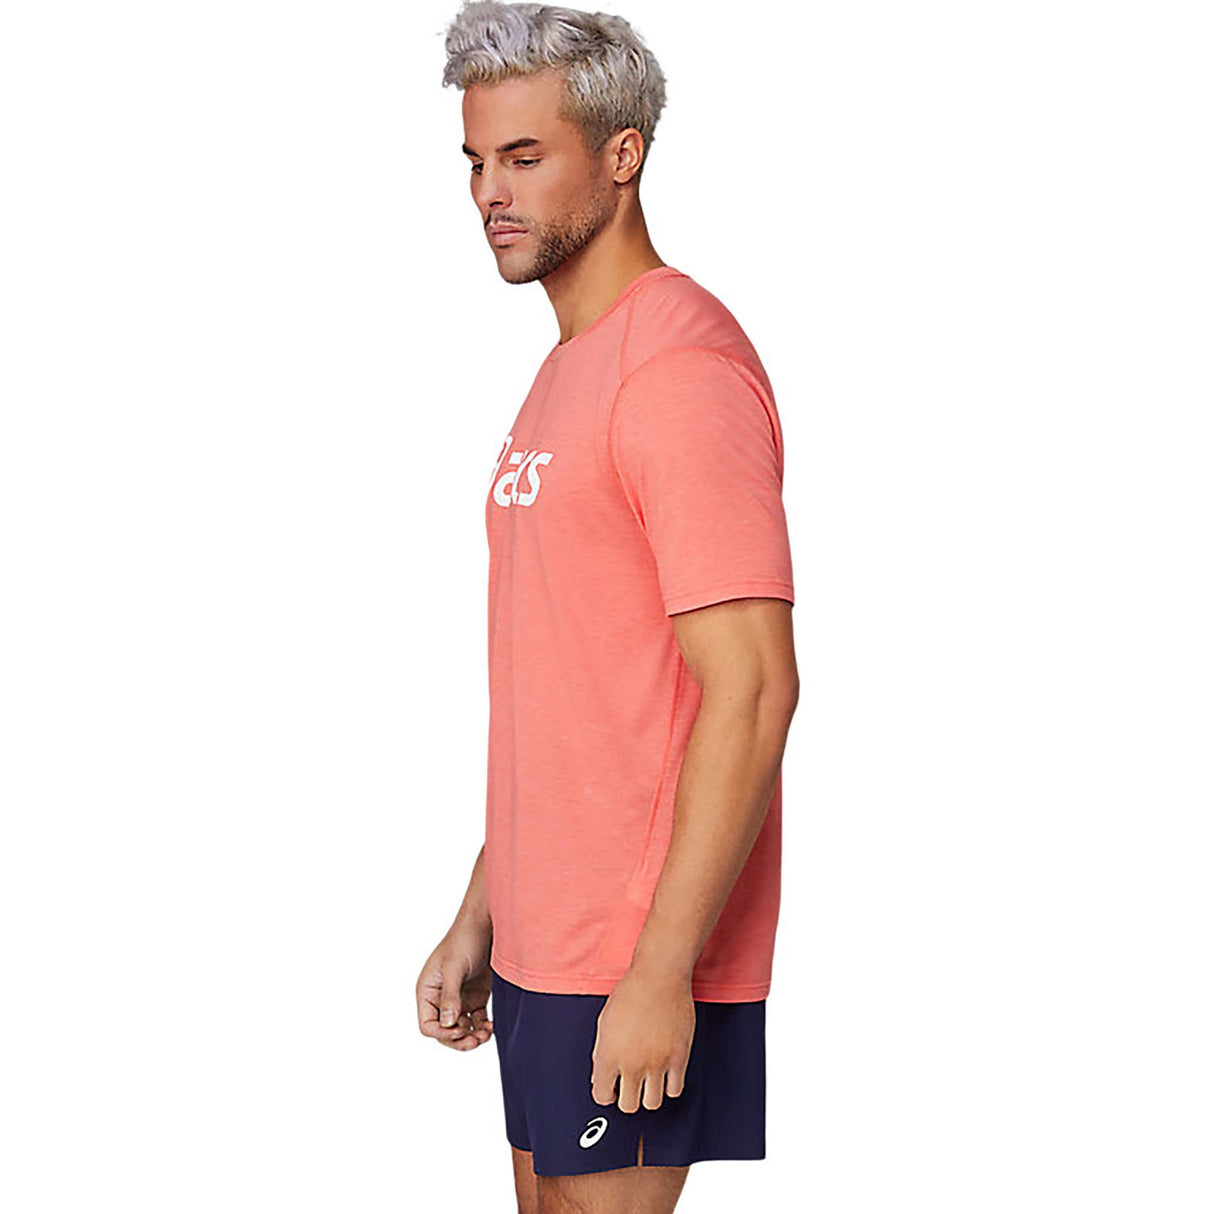 ASICS Triblend Training T-shirt red alert heather homme lateral